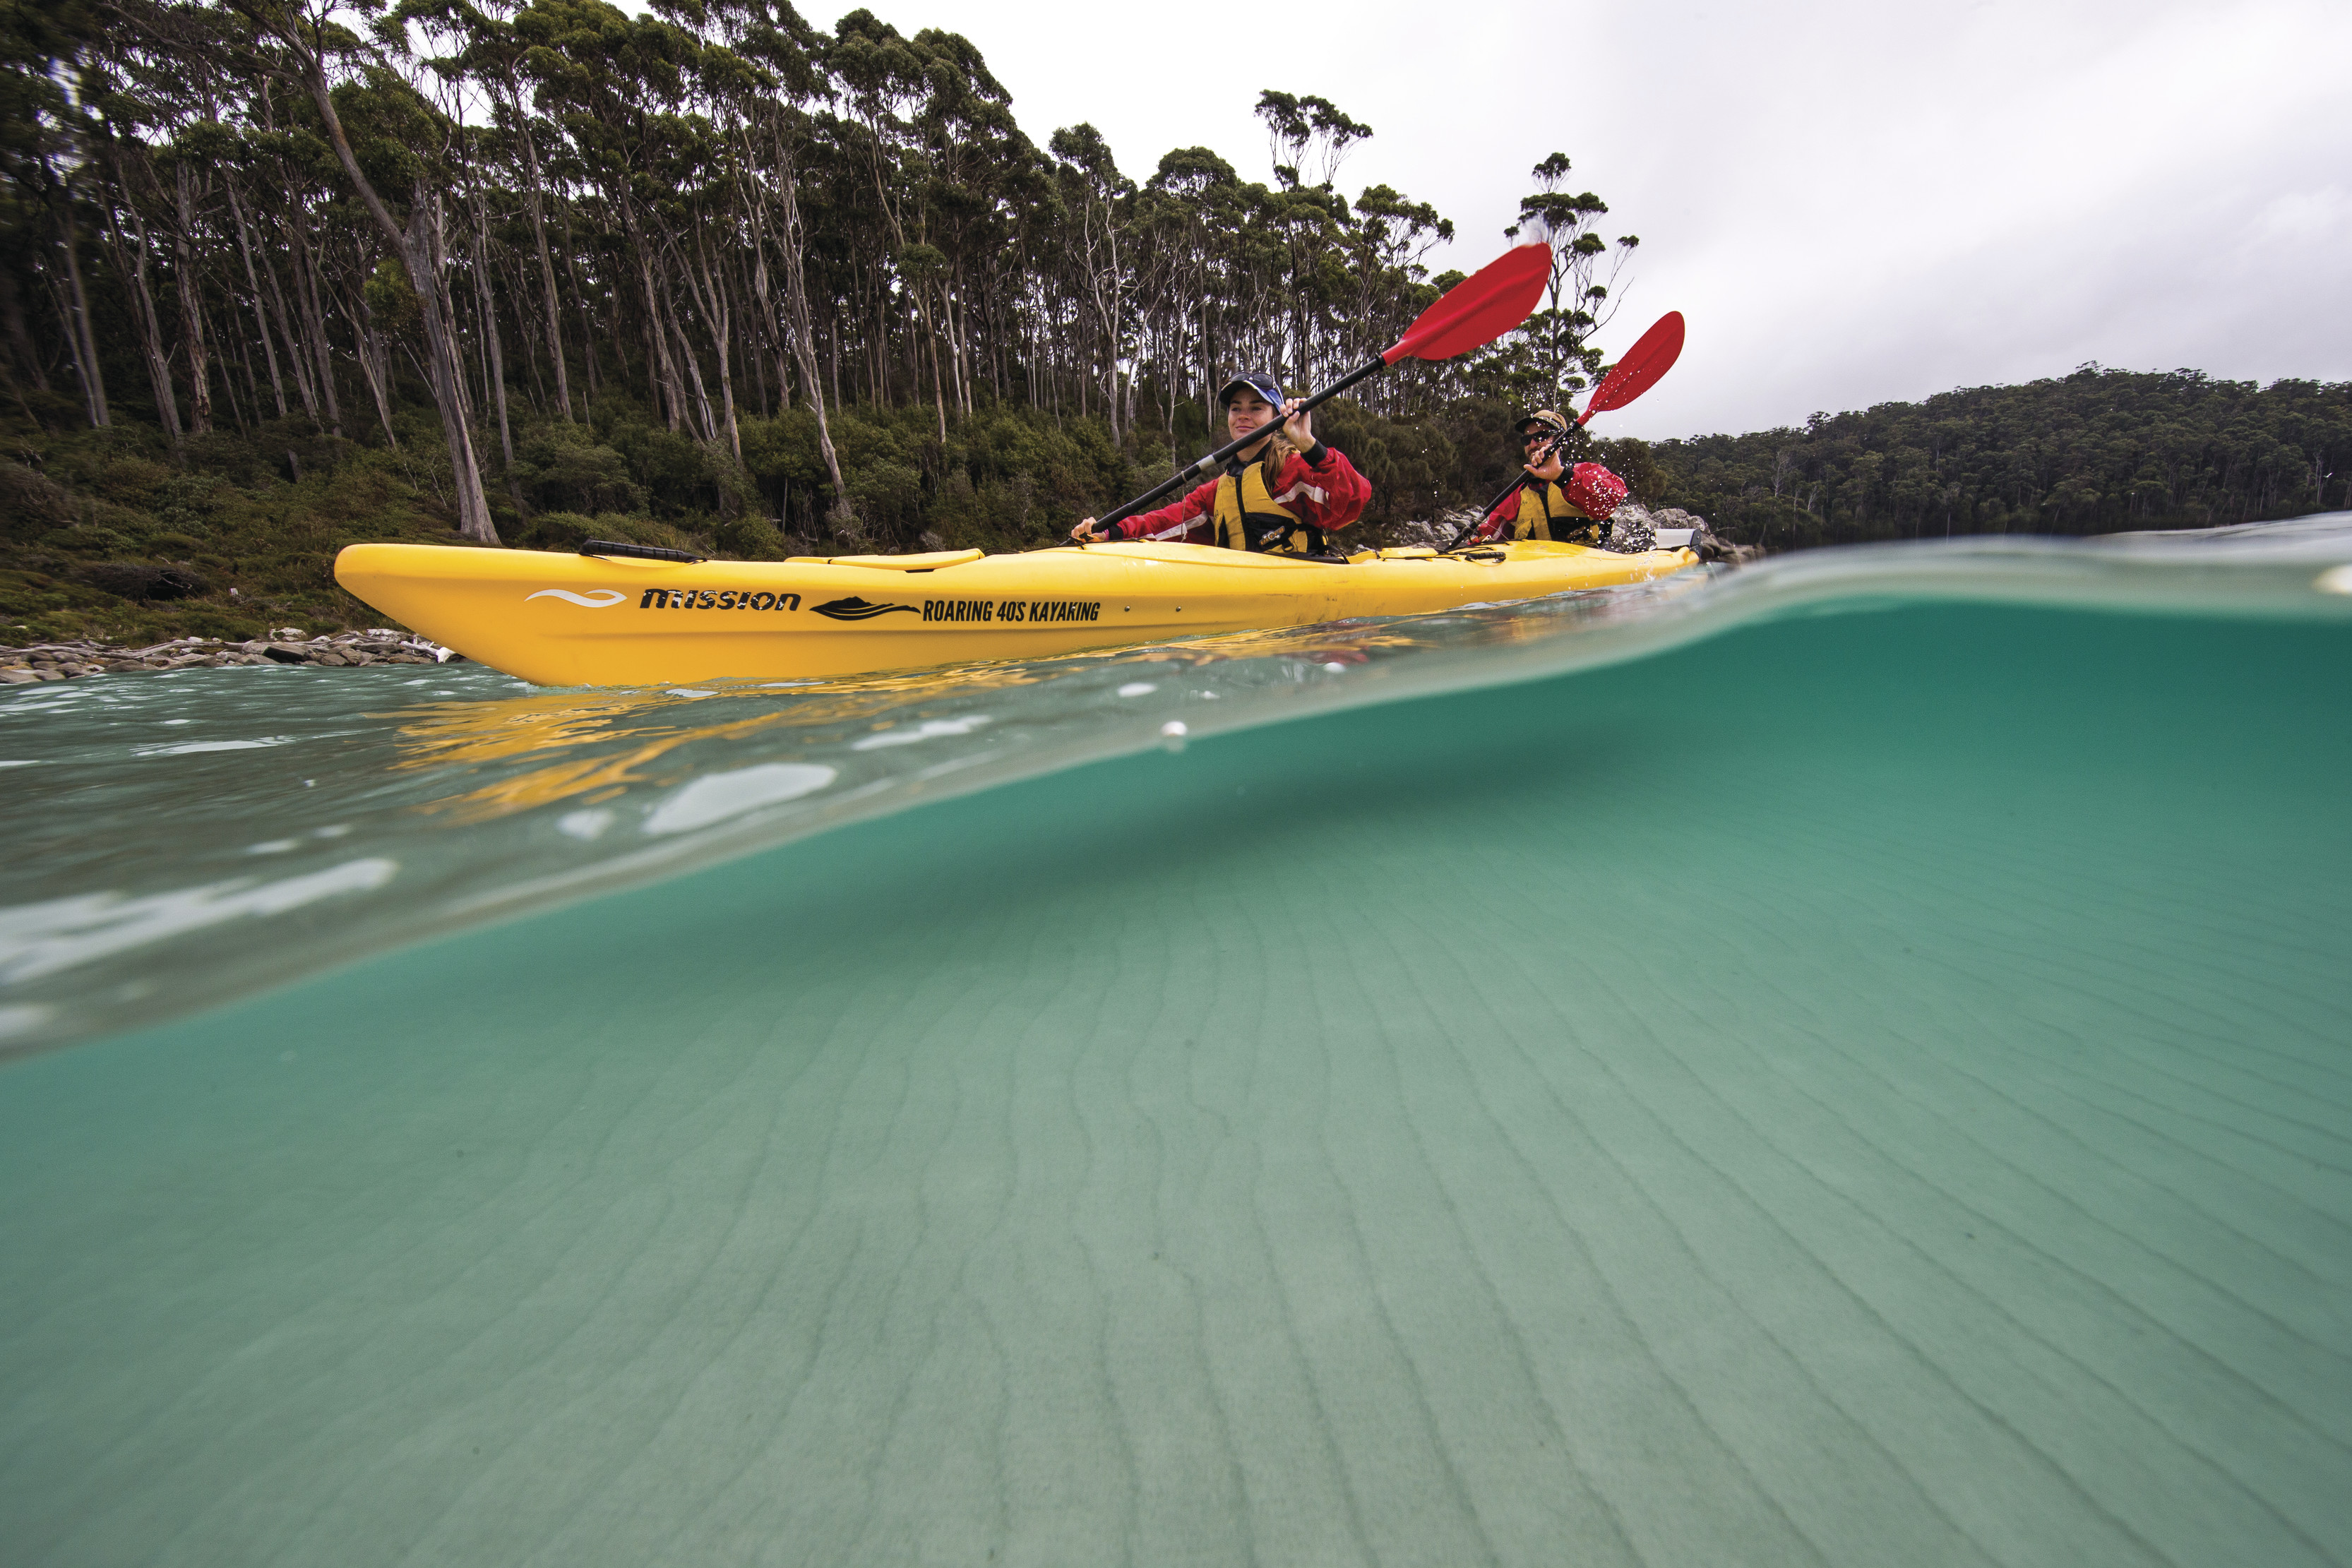 Stunning wide angle, over/under image of two people in a twin kayak, paddling along pristine, blue water.